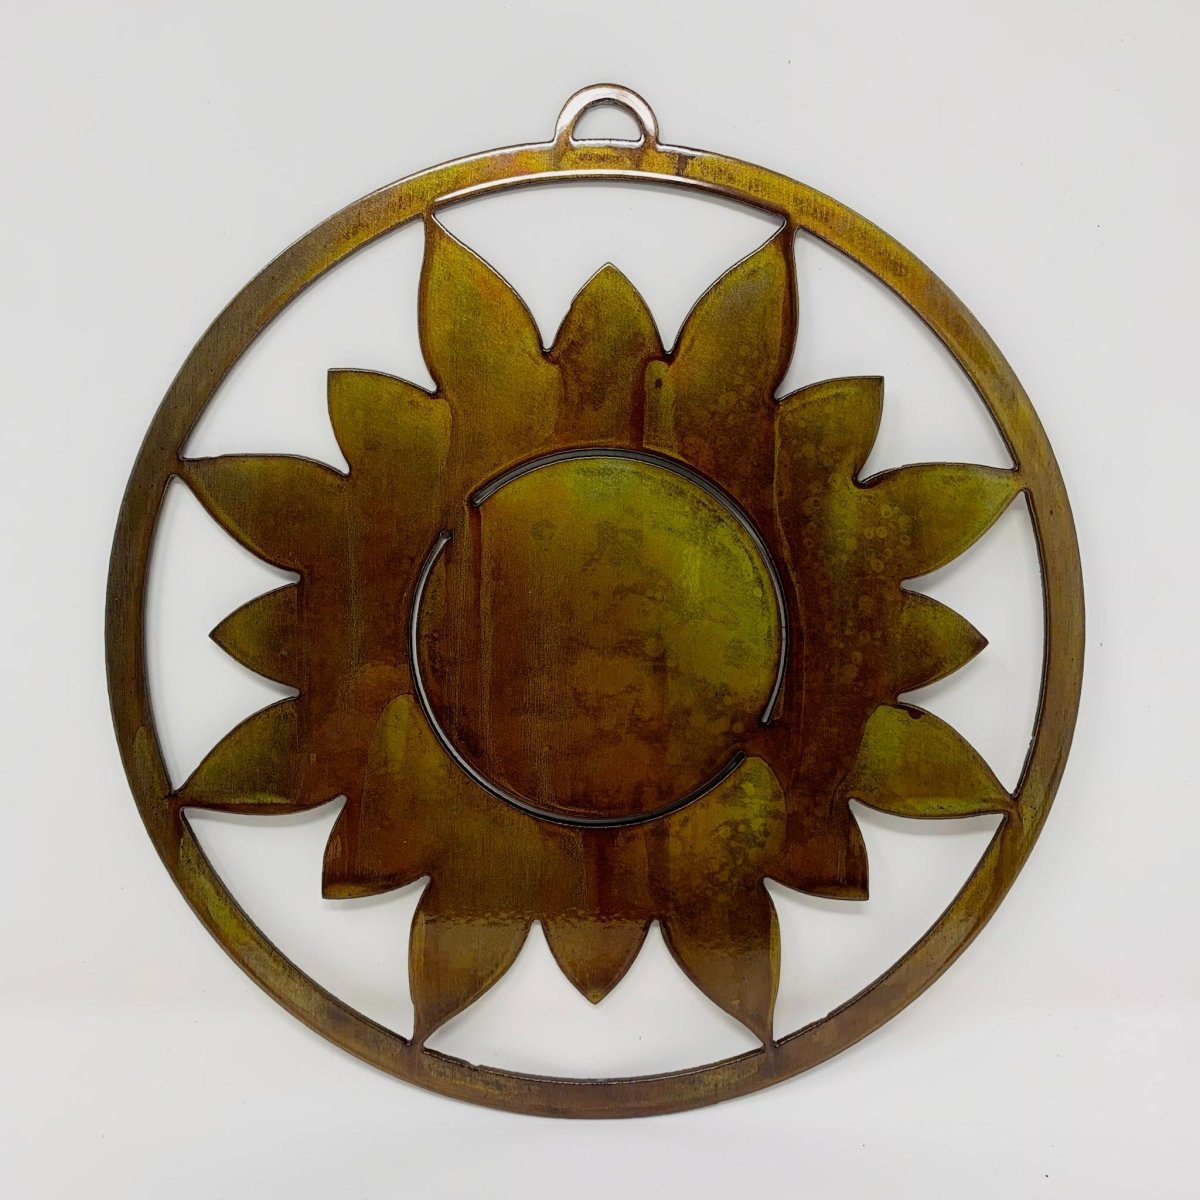 Sunflower Metal Ring - The Iron Hutch